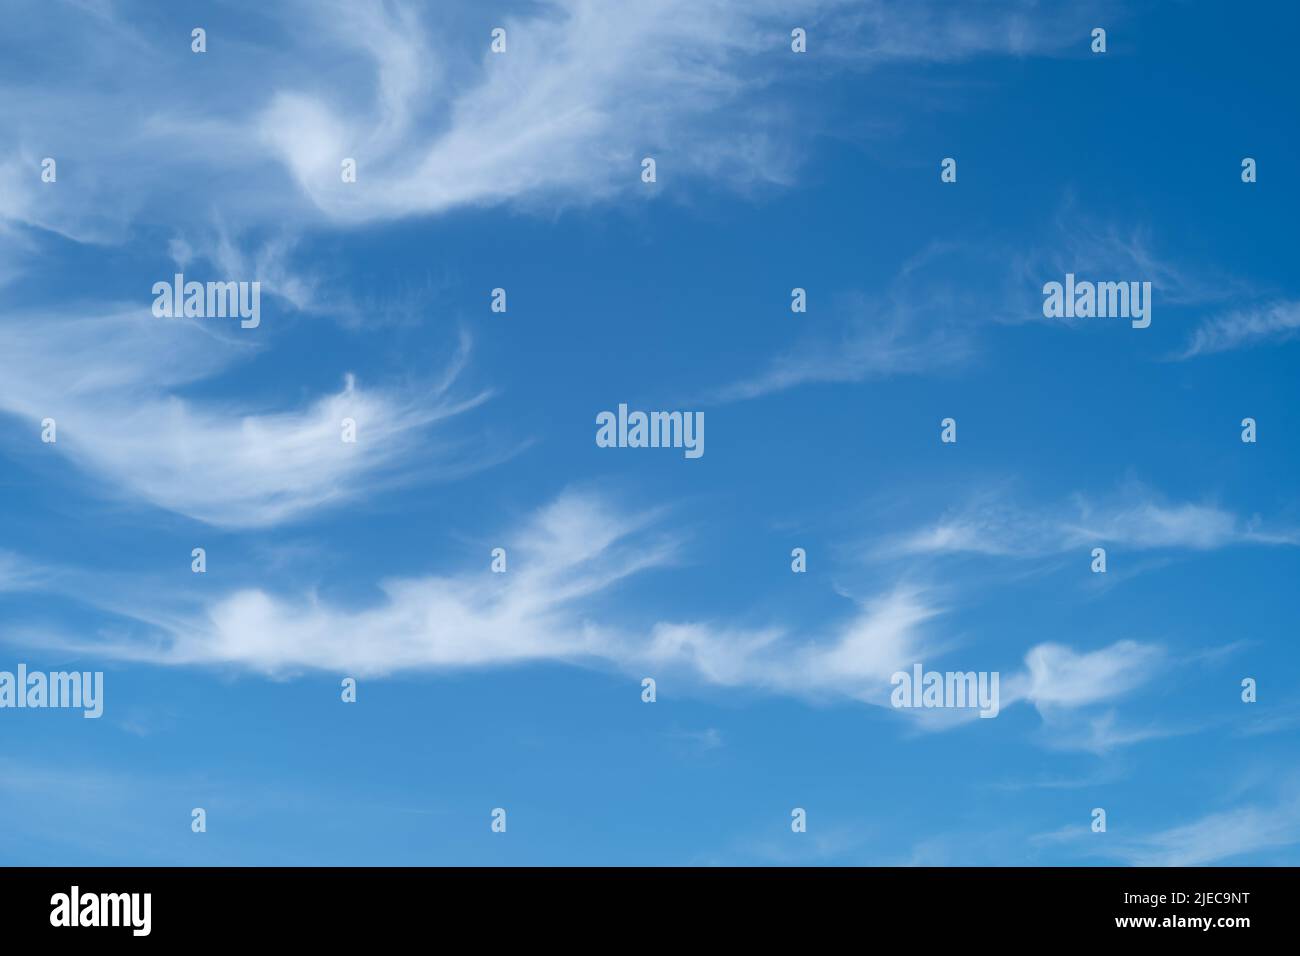 Unusual patterns of wispy clouds against a blue sky on a summer day Stock Photo